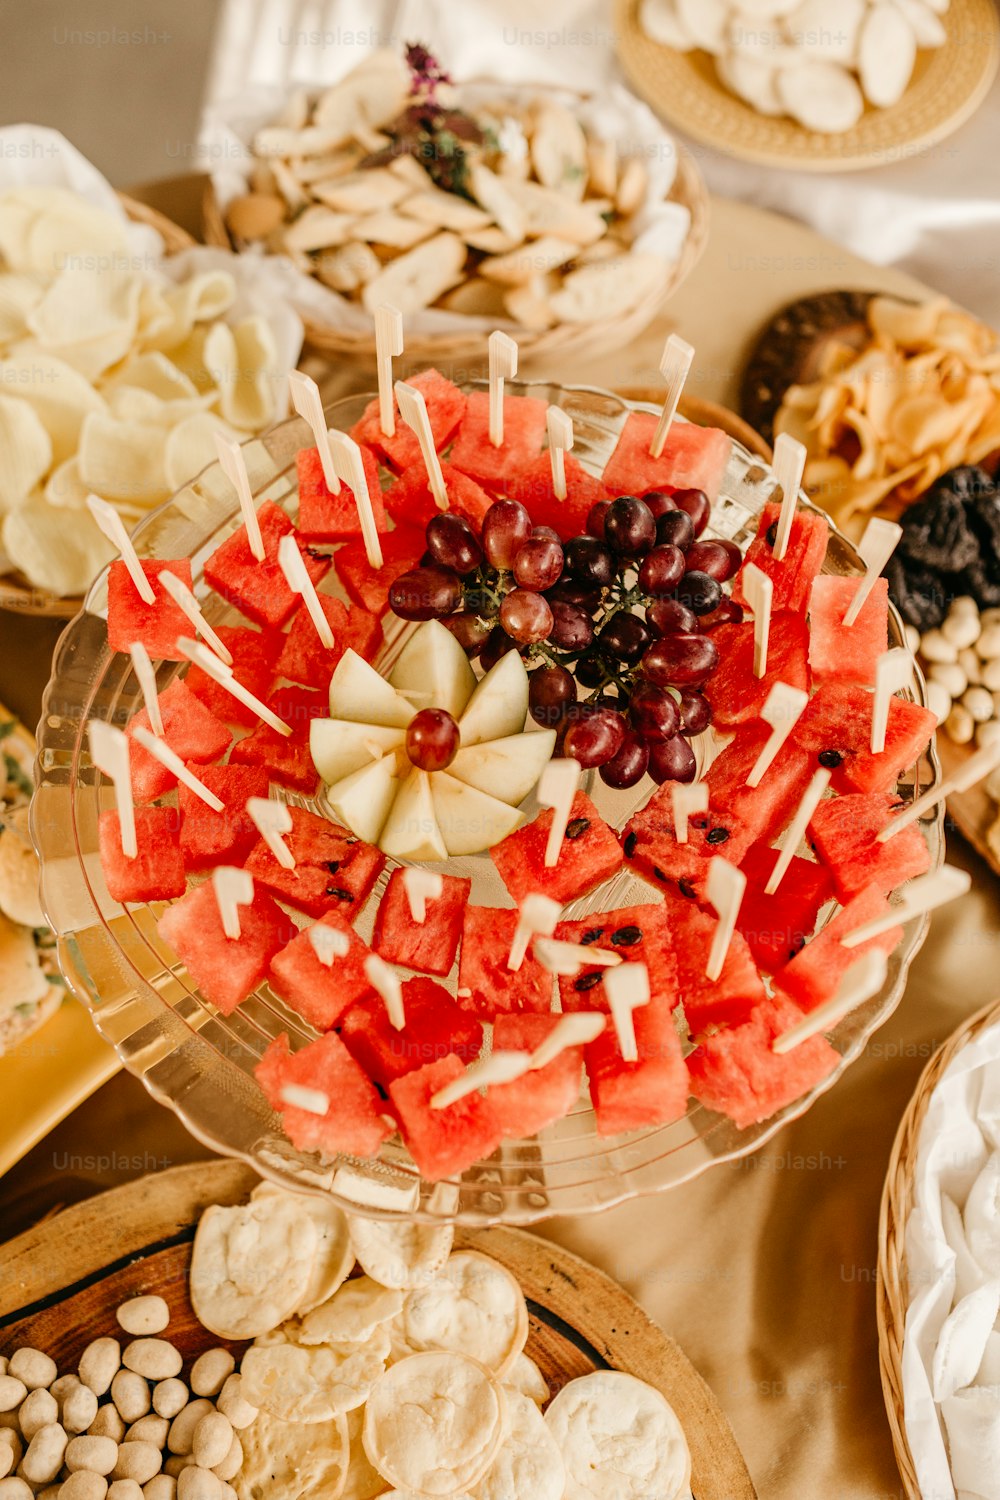 a platter of watermelon, grapes, cheese, and crackers